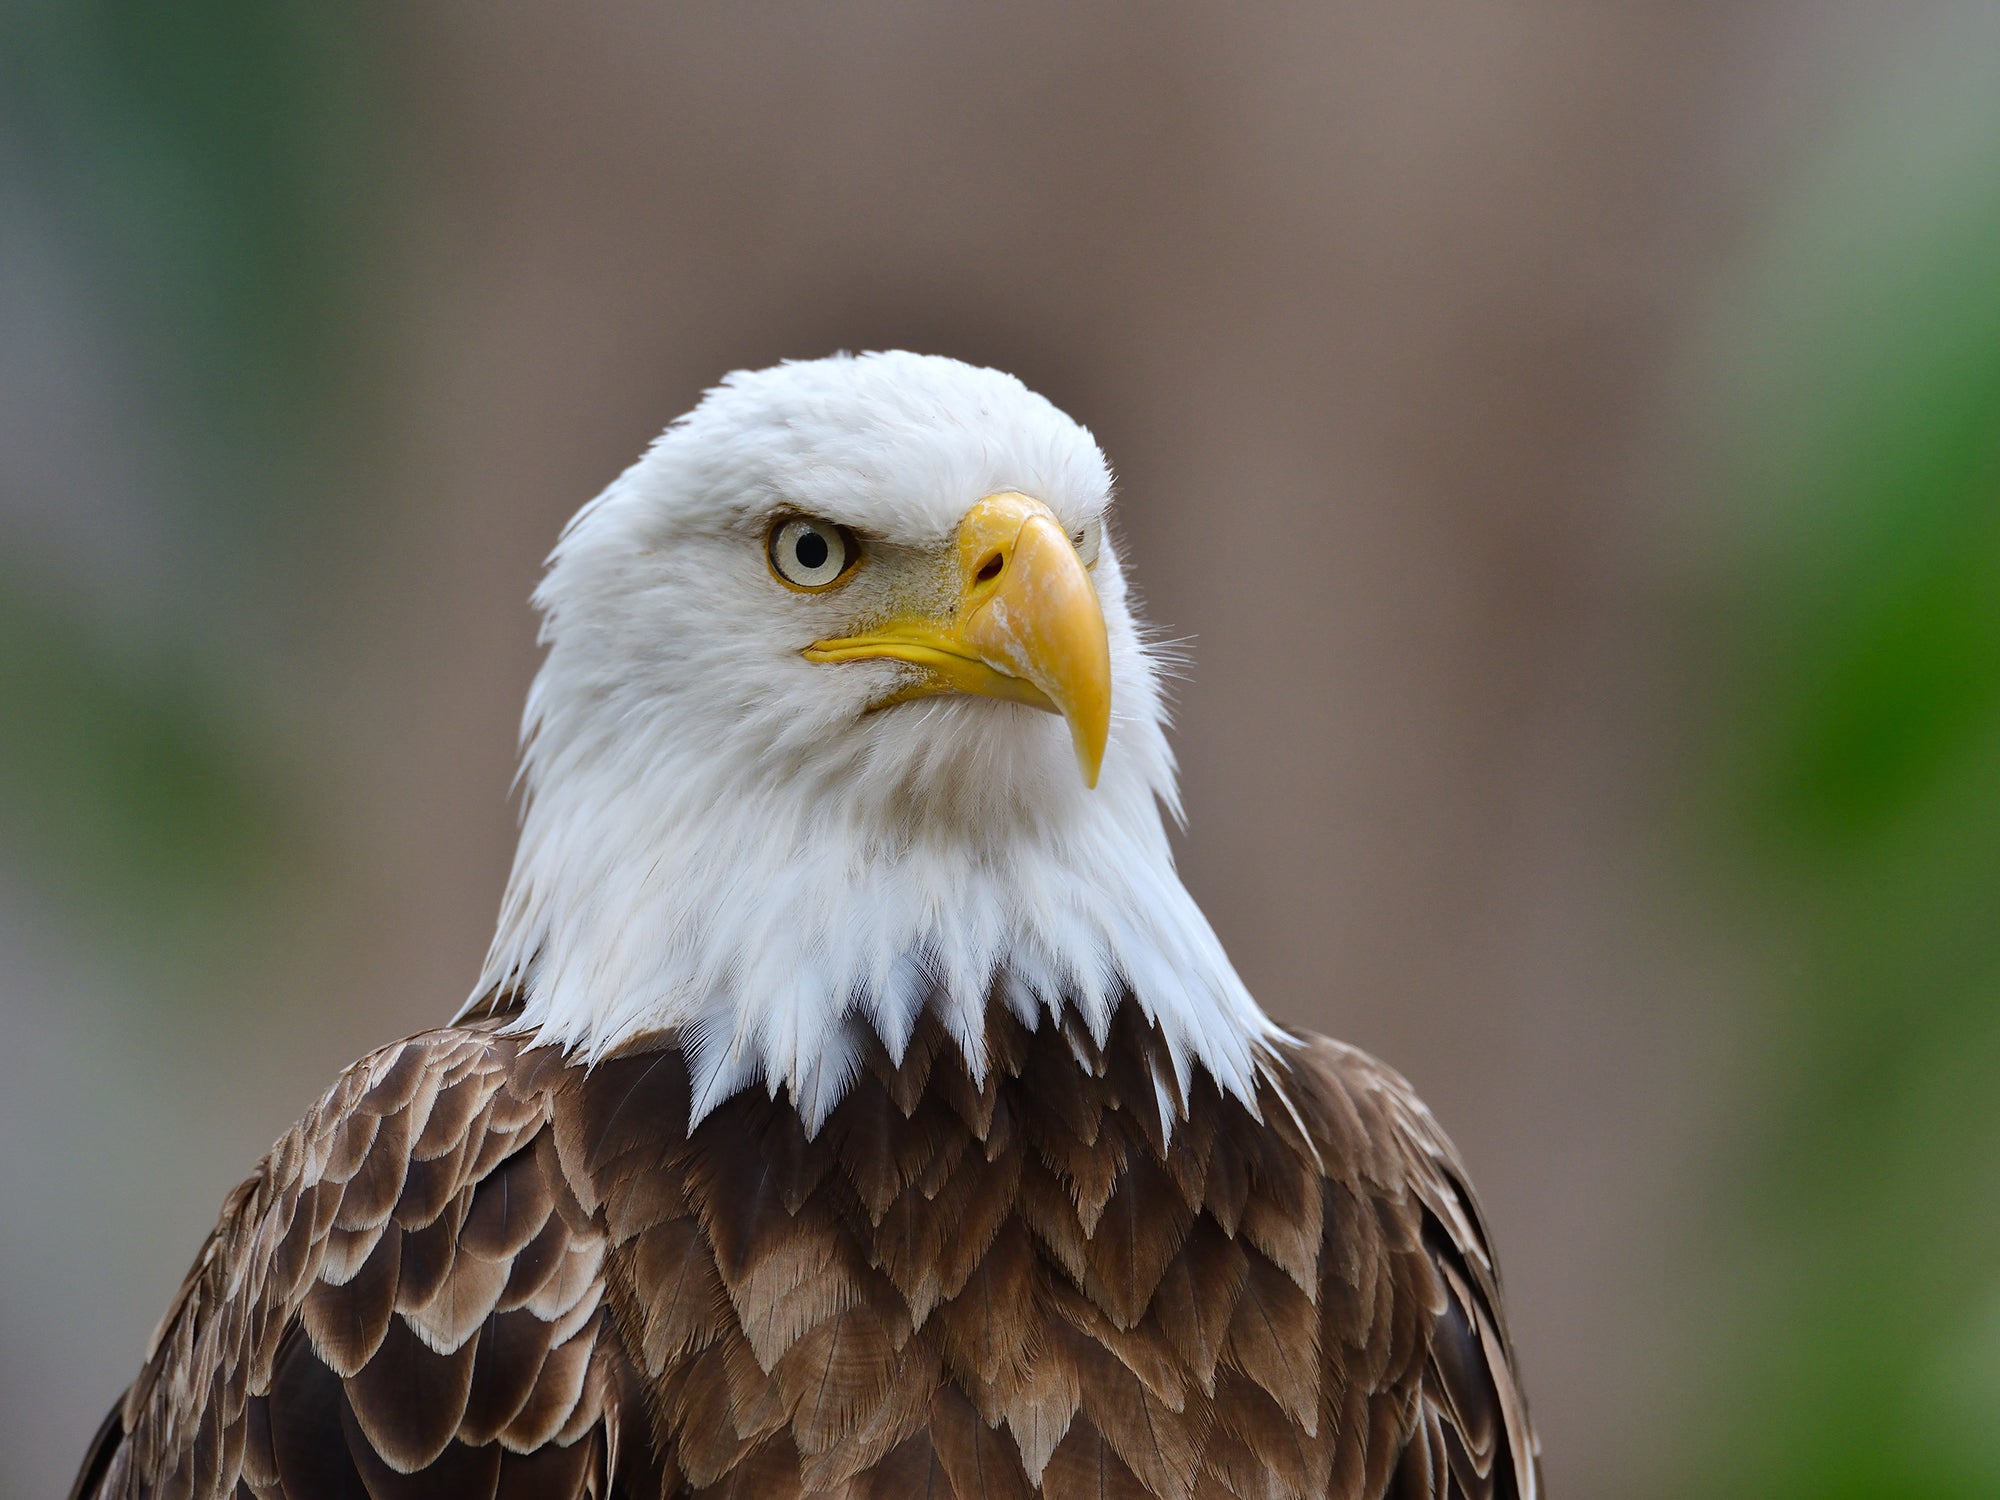 Why a wind power company pled guilty to killing 100 protected eagles thumbnail